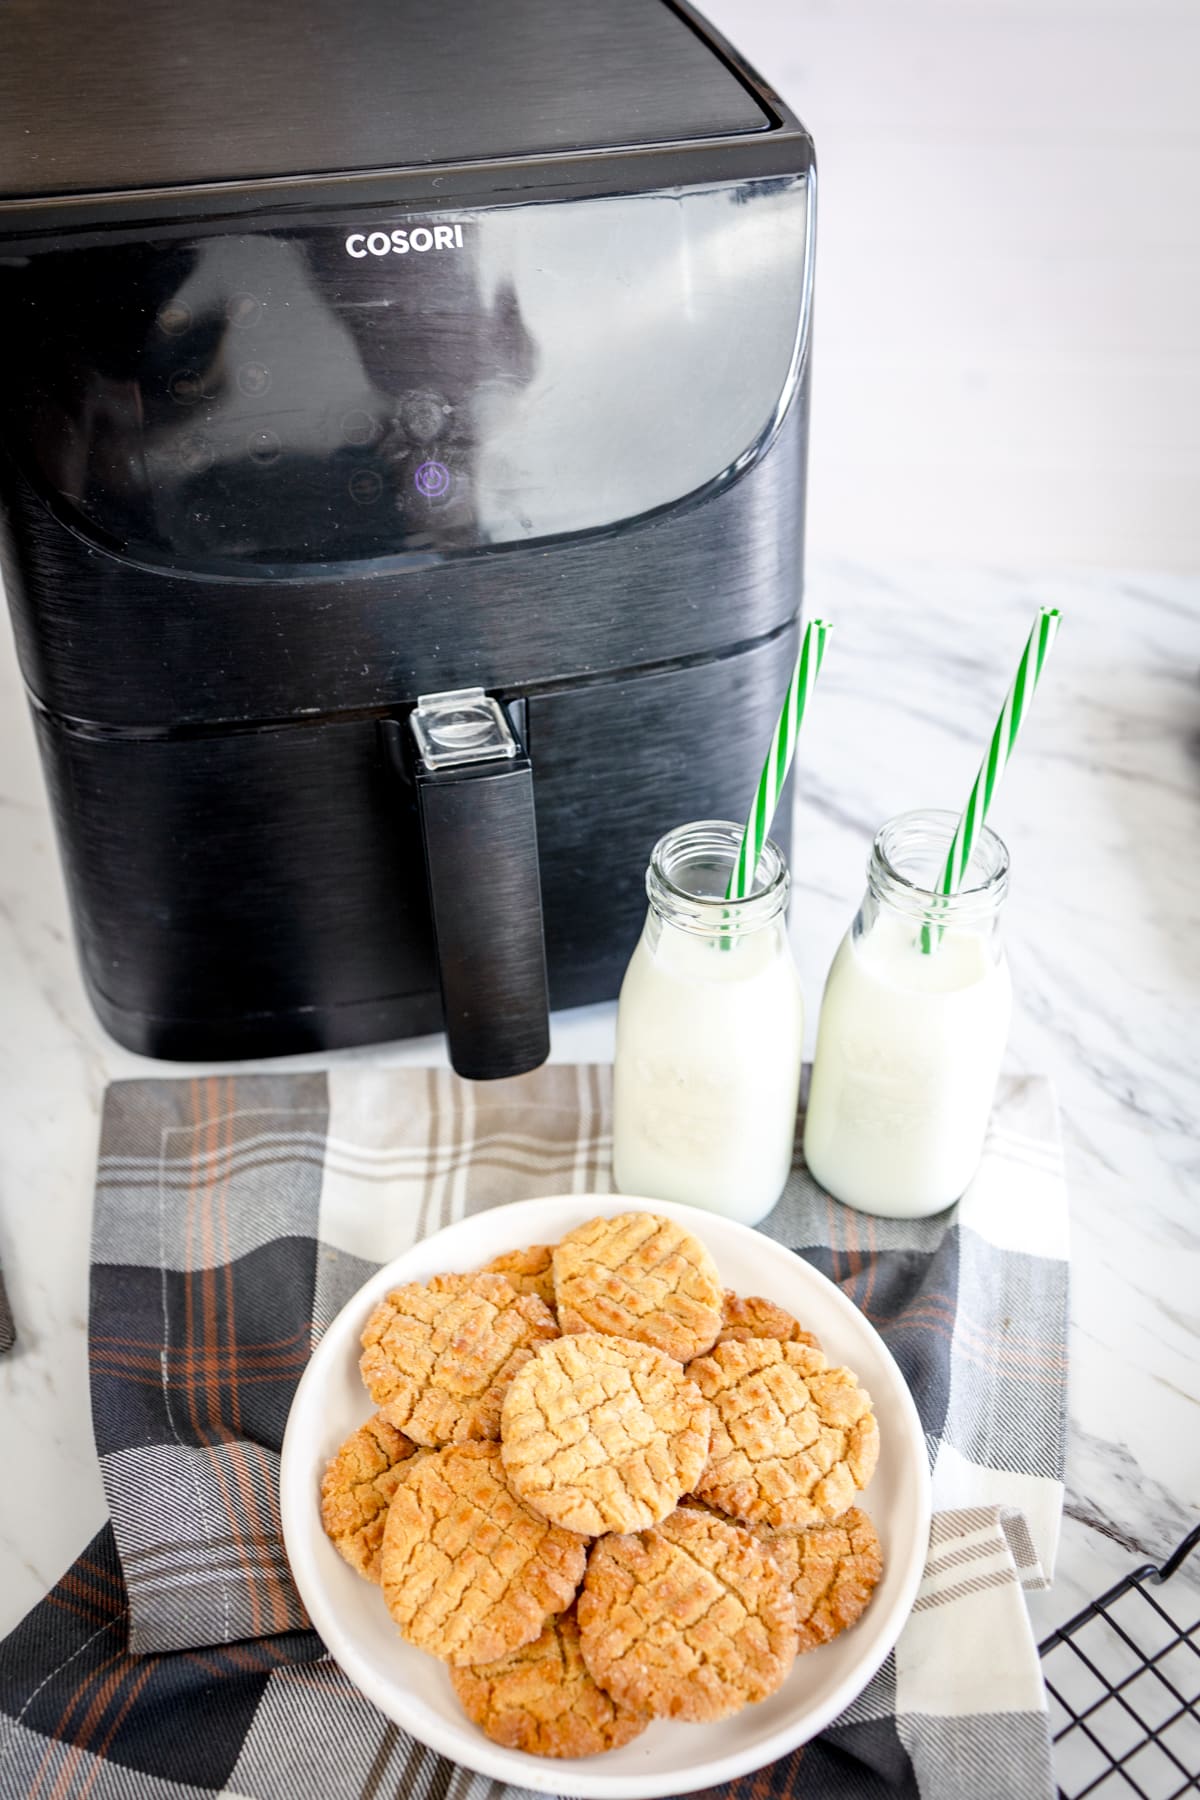 A plate of peanut butter cookies on a table next to an air fryer and a glass of milk.